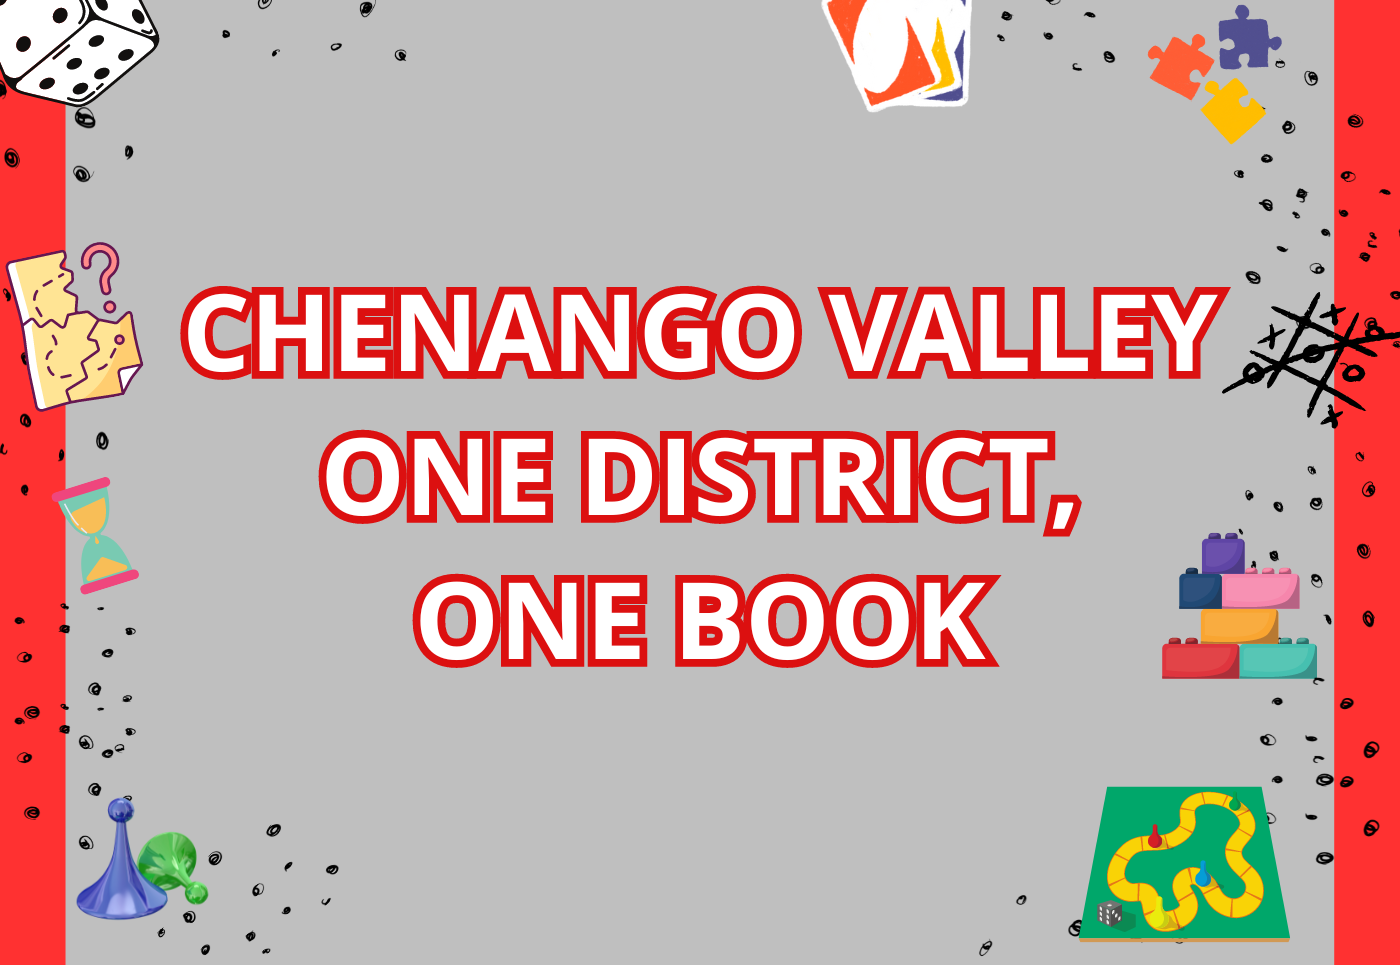 Chenango Valley One District, One Book